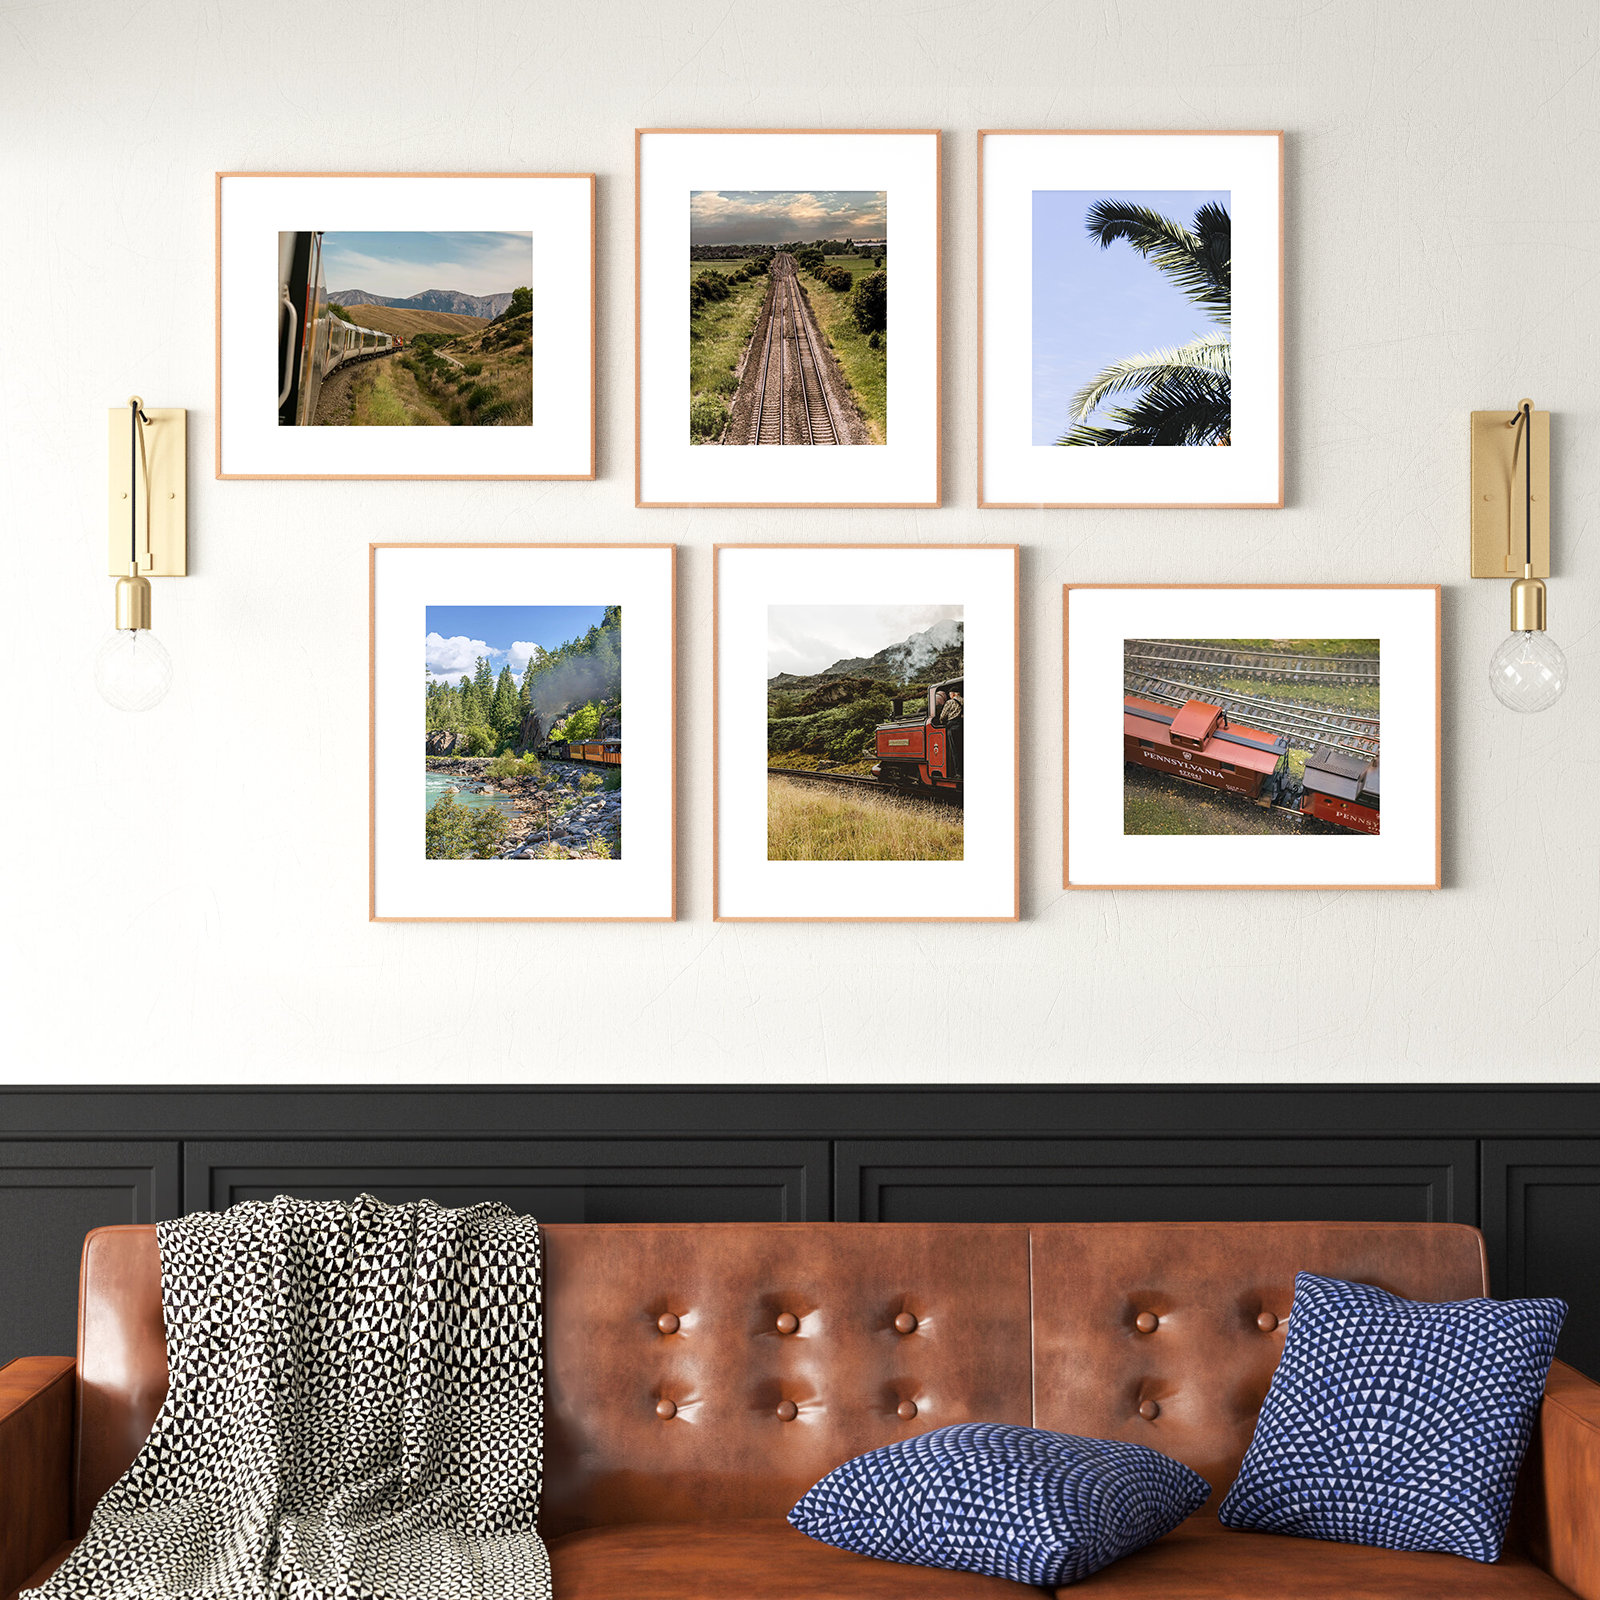 16x20 Gallery Picture Frame, Display Poster 11x14 with Ivory Mat, for Photo Collage Canvas (Set of 3) Latitude Run Color: Black